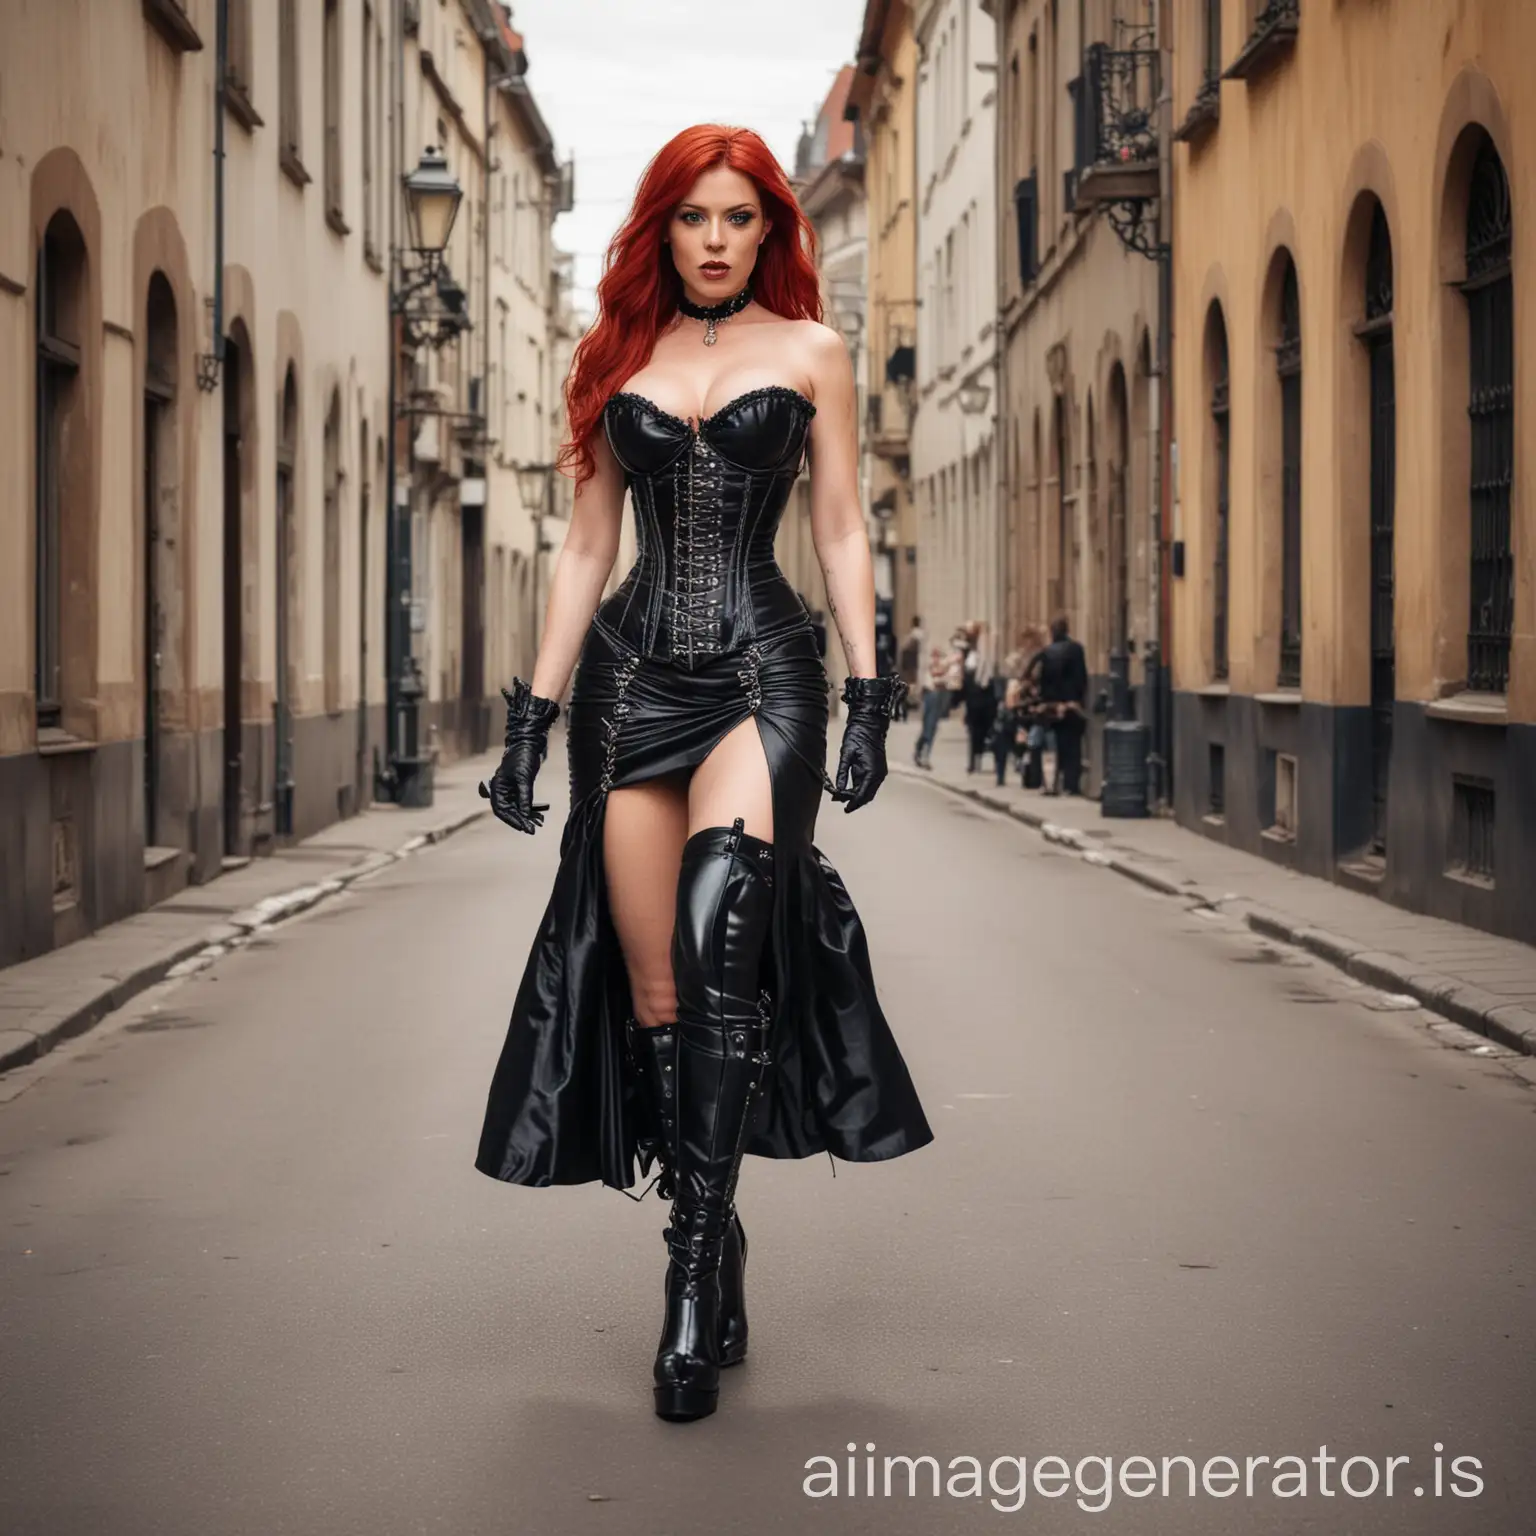 Dominatrix robusta with a wide dress walking on the street with corset and high boots. Red hair